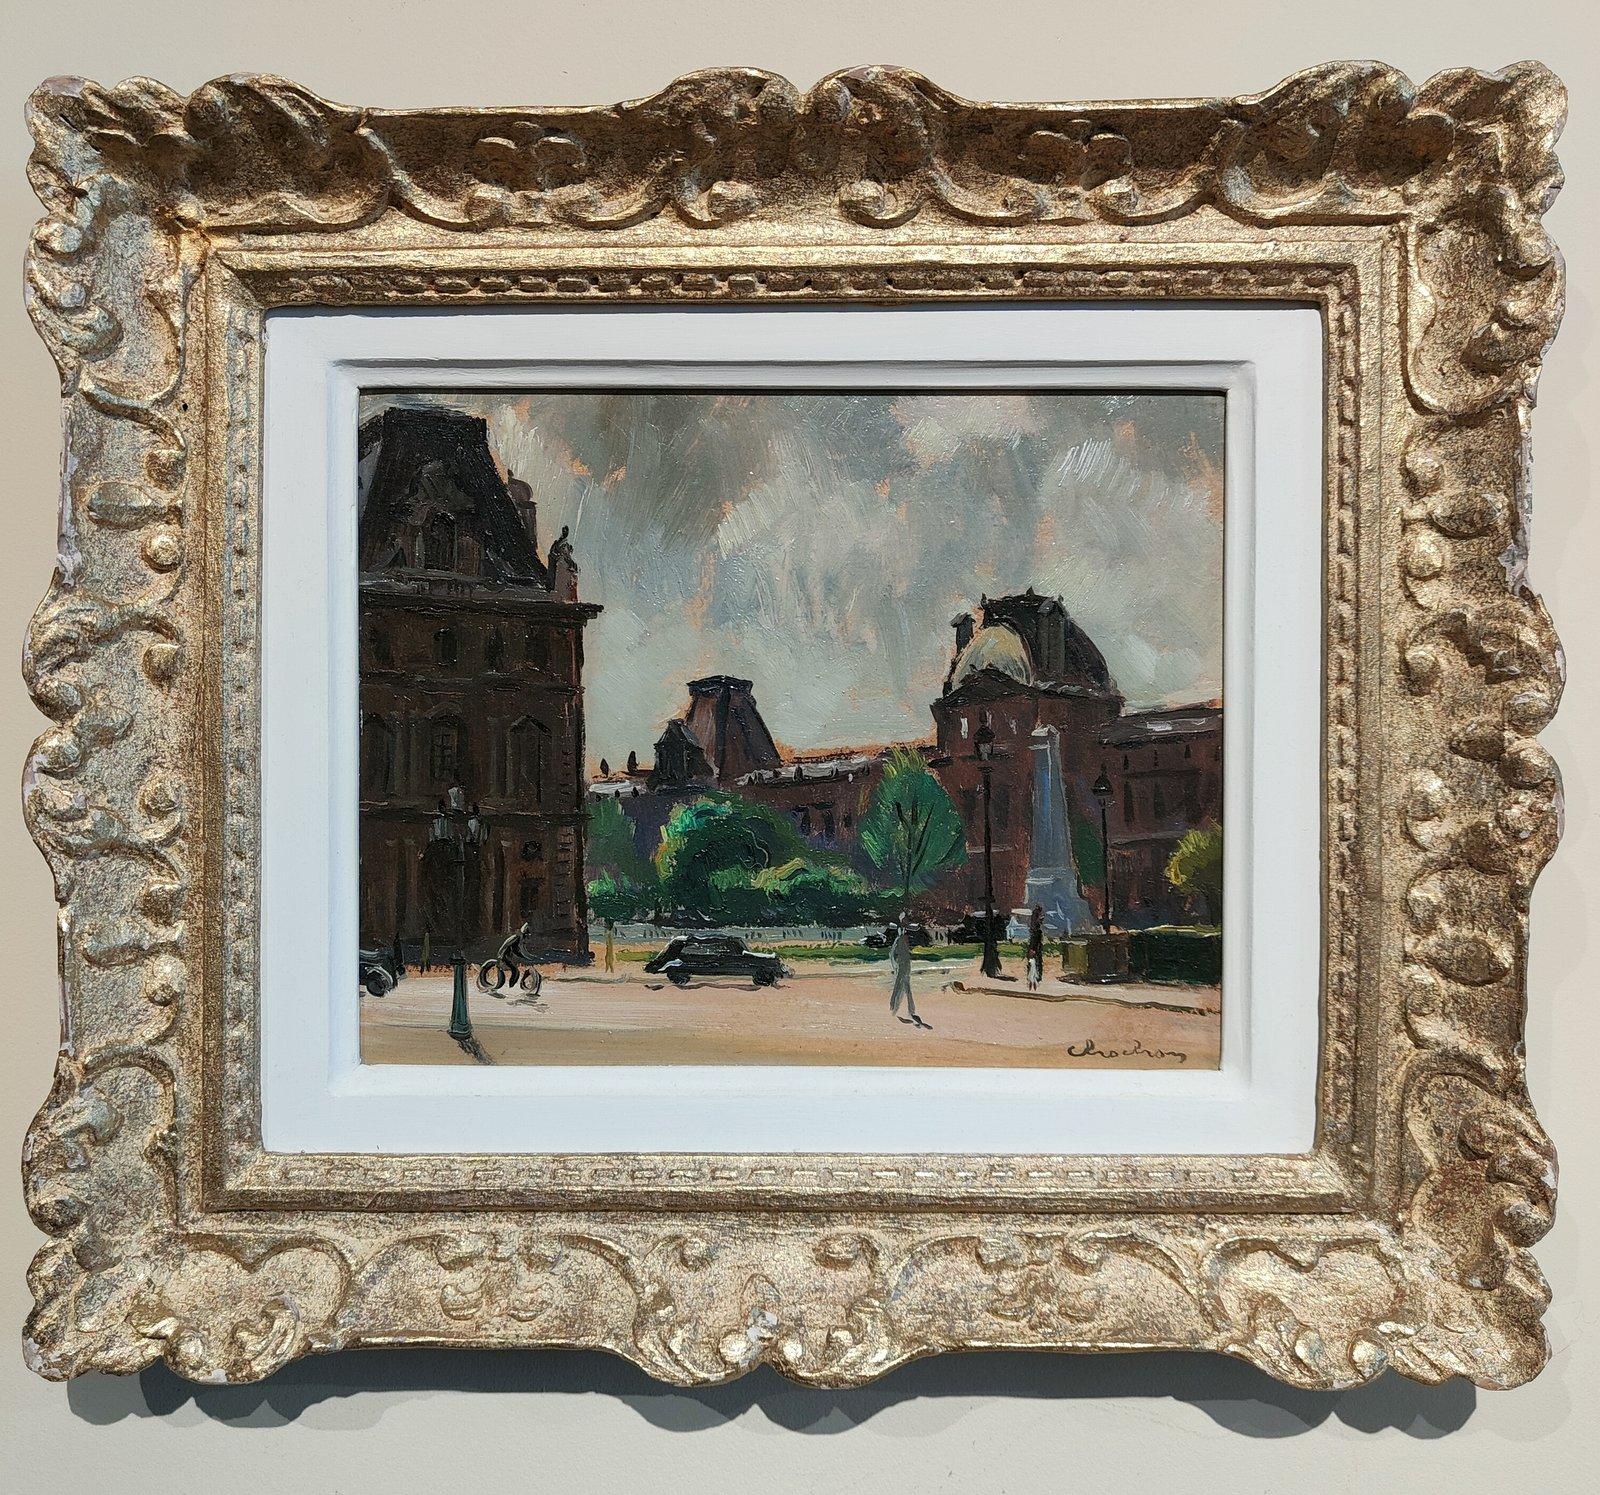 Oil Painting by Andre Eugene Louis Chochon "The Lourve" 1910 -2005 Studied Beaux Arts in Reines then exhibited at the society des Artistes. Francois from 1933, Grand Prix de Rome 1938, represented Poidou centre and Rees A.G. Oil on board 8 x 9.5.